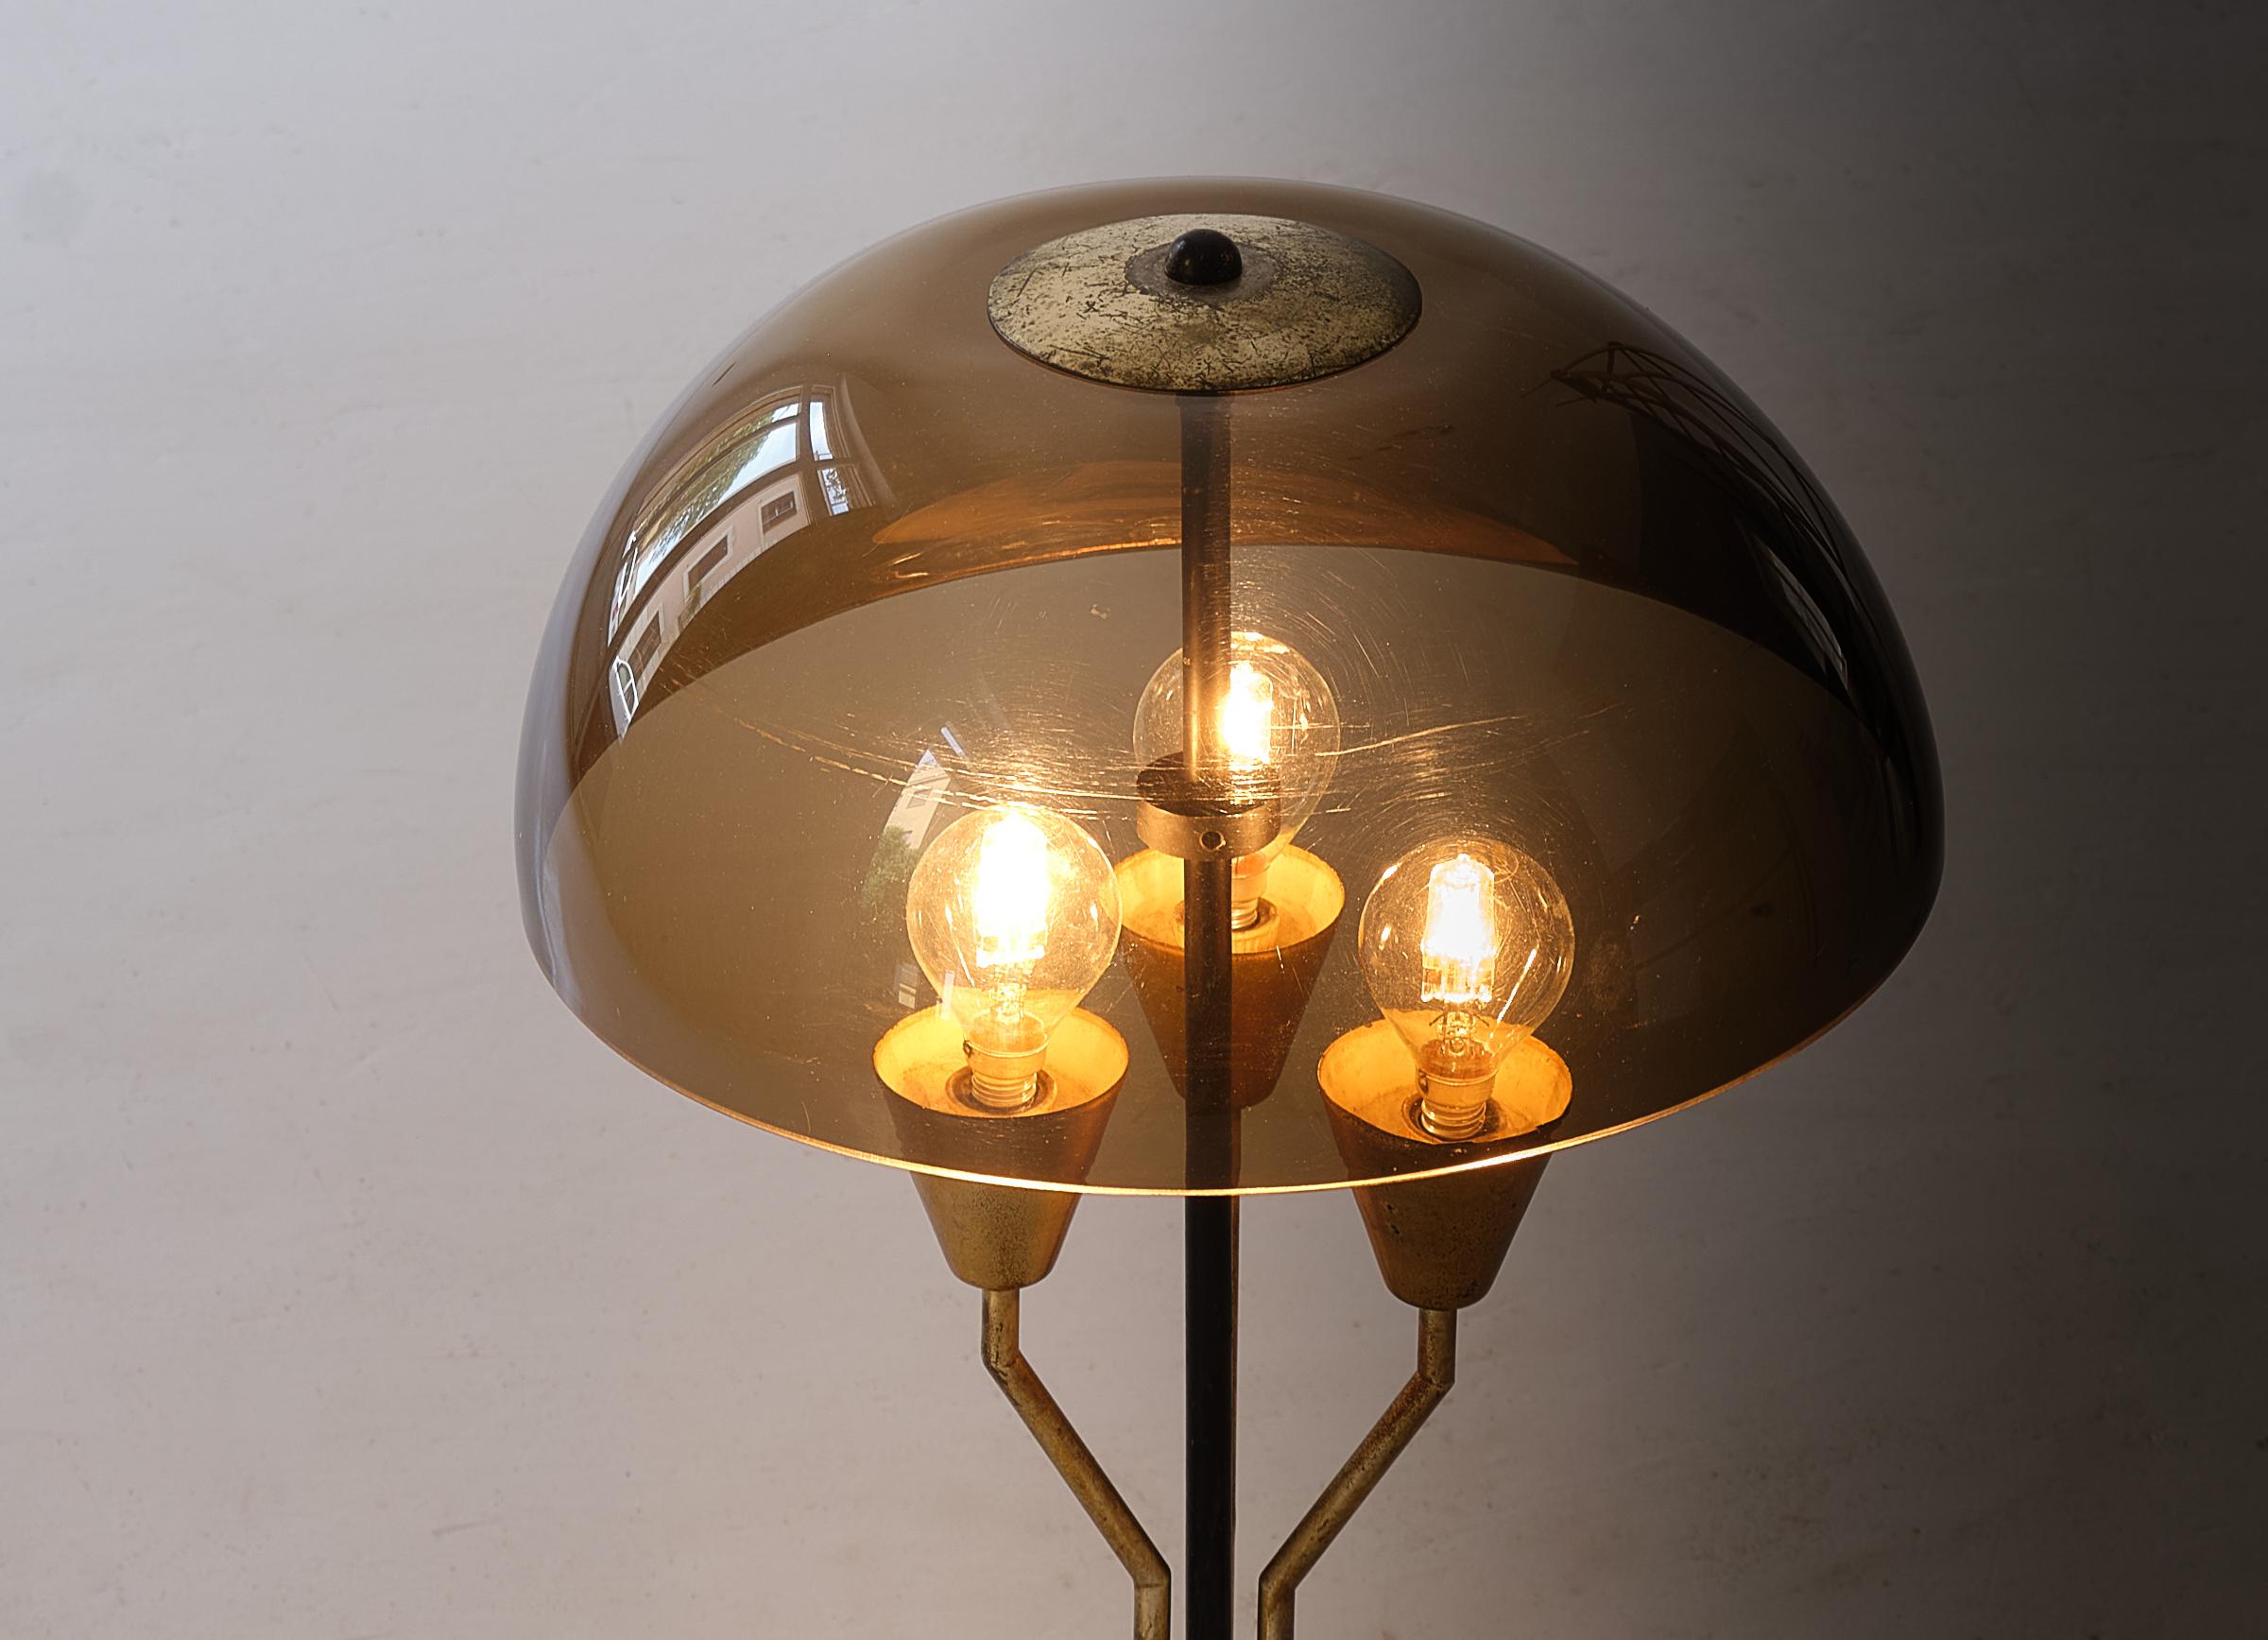 An interesting lamp of Italian production from the 1960s.
It has a marble base , perspex shade and brass details .
The condition is very good, it is a vintage with pleasant signs of aging

3 standard e14 bulbs
The wire is original and functional ,